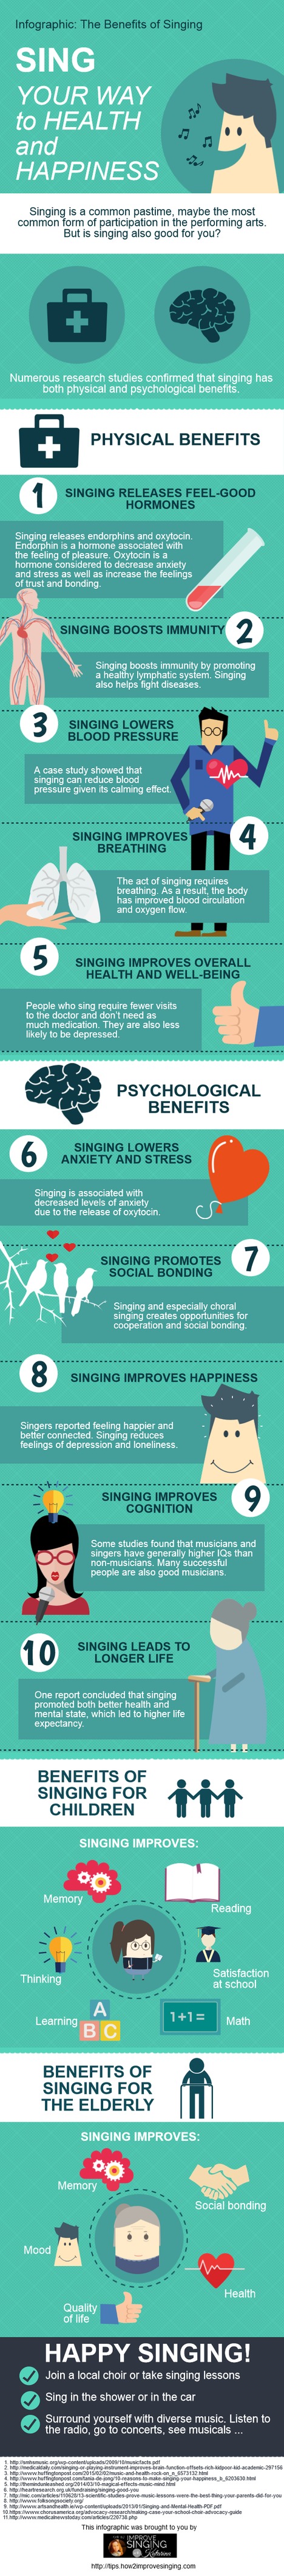 Sing Your Way to Health and Happiness